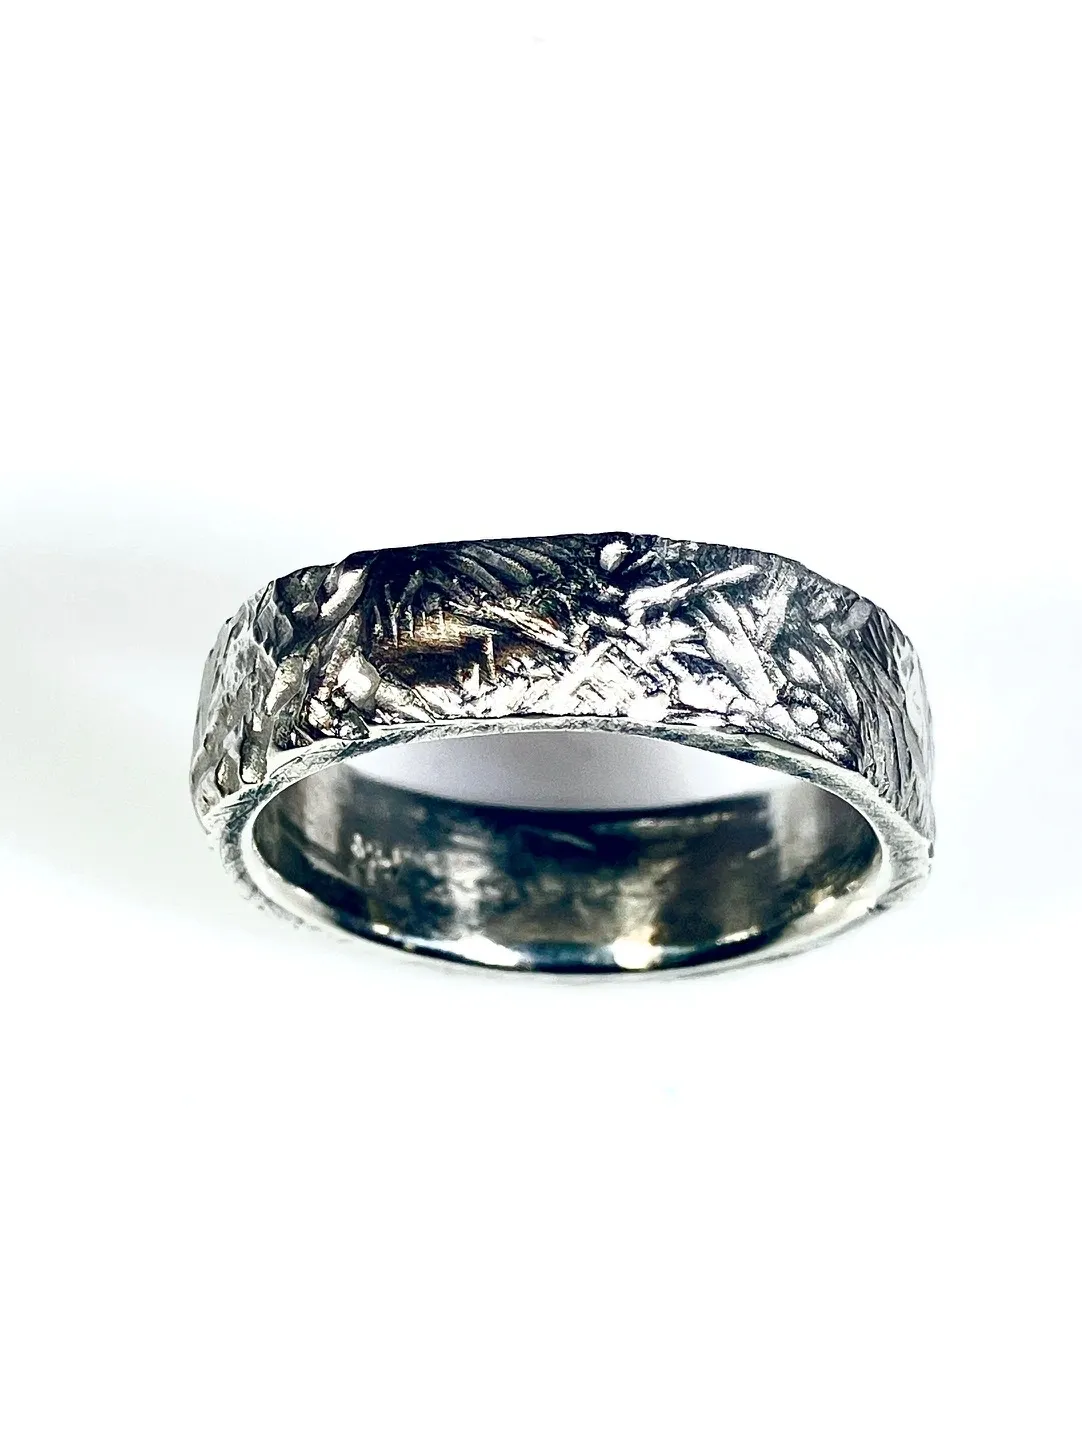 A silver ring with a metal pattern on it.